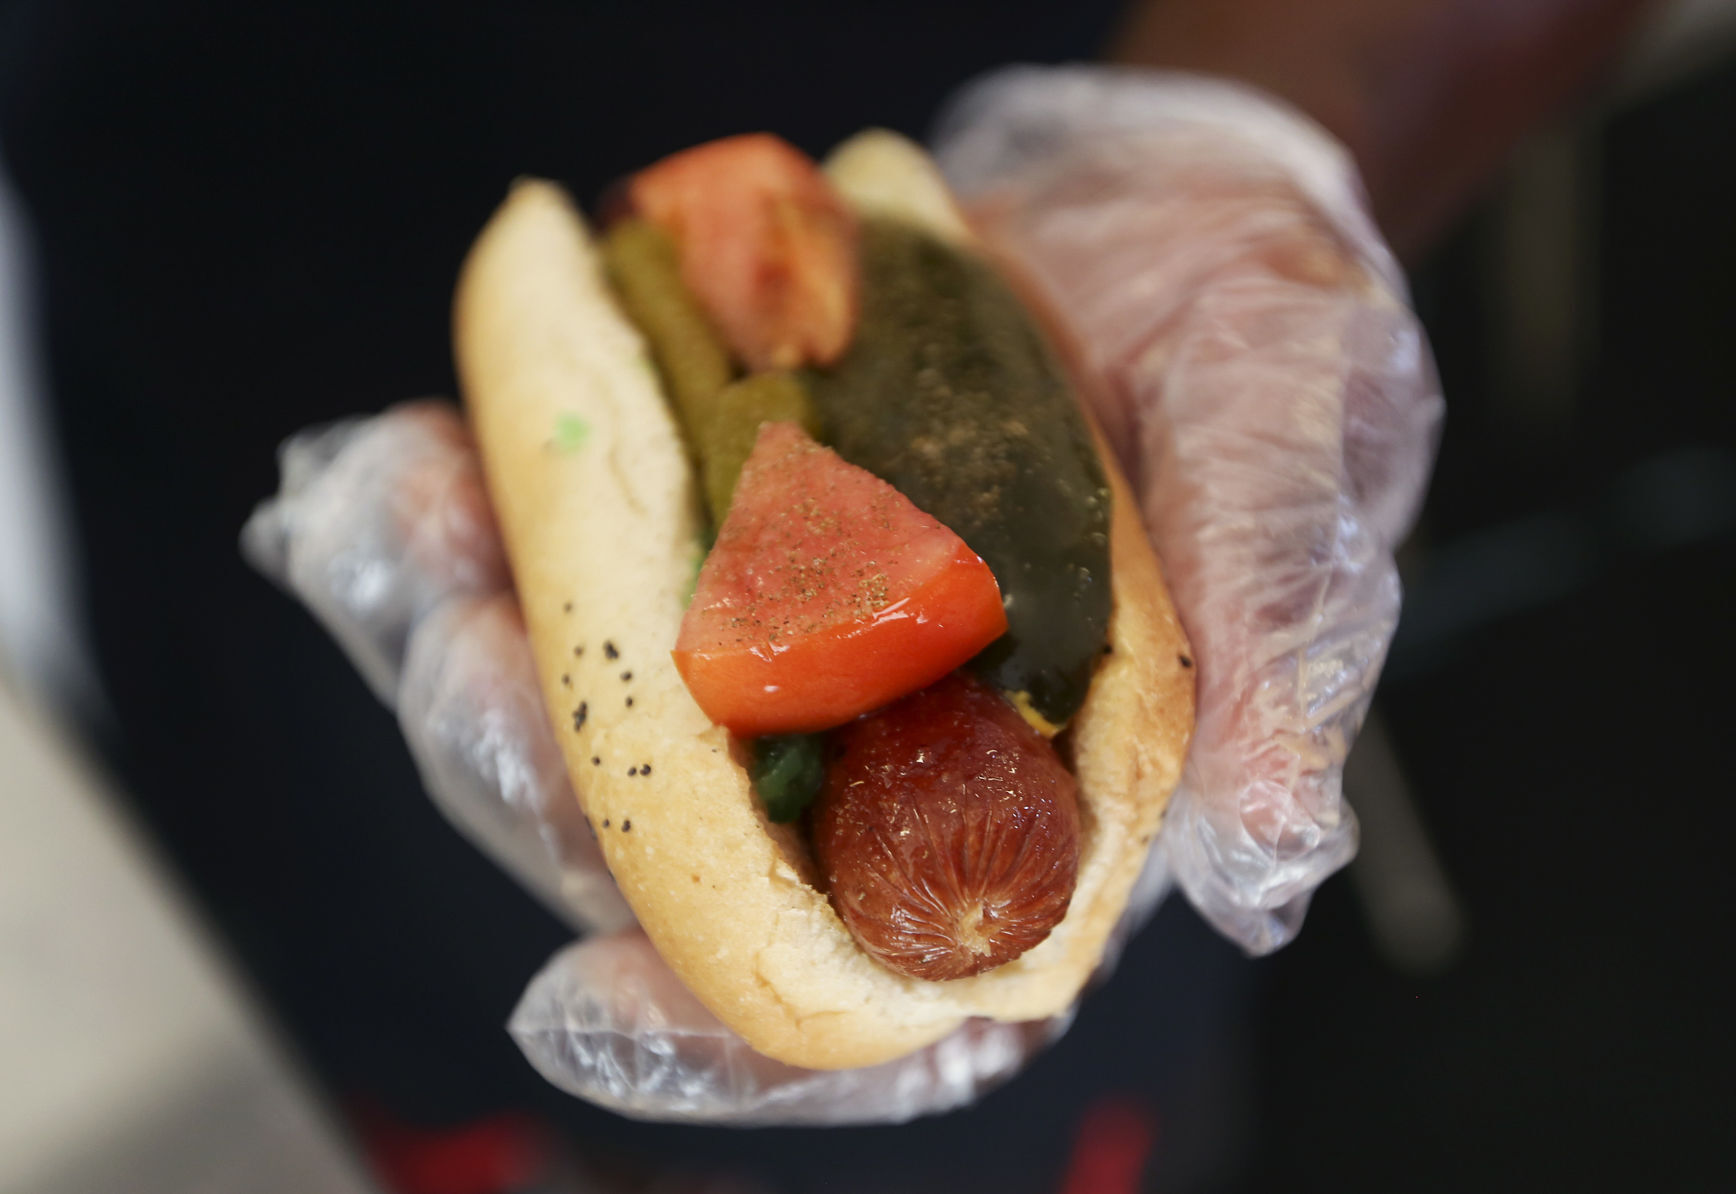 A Polish is prepared at Hot Diggity Dogz in Dubuque on Friday, Aug. 7, 2020 PHOTO CREDIT: NICKI KOHL